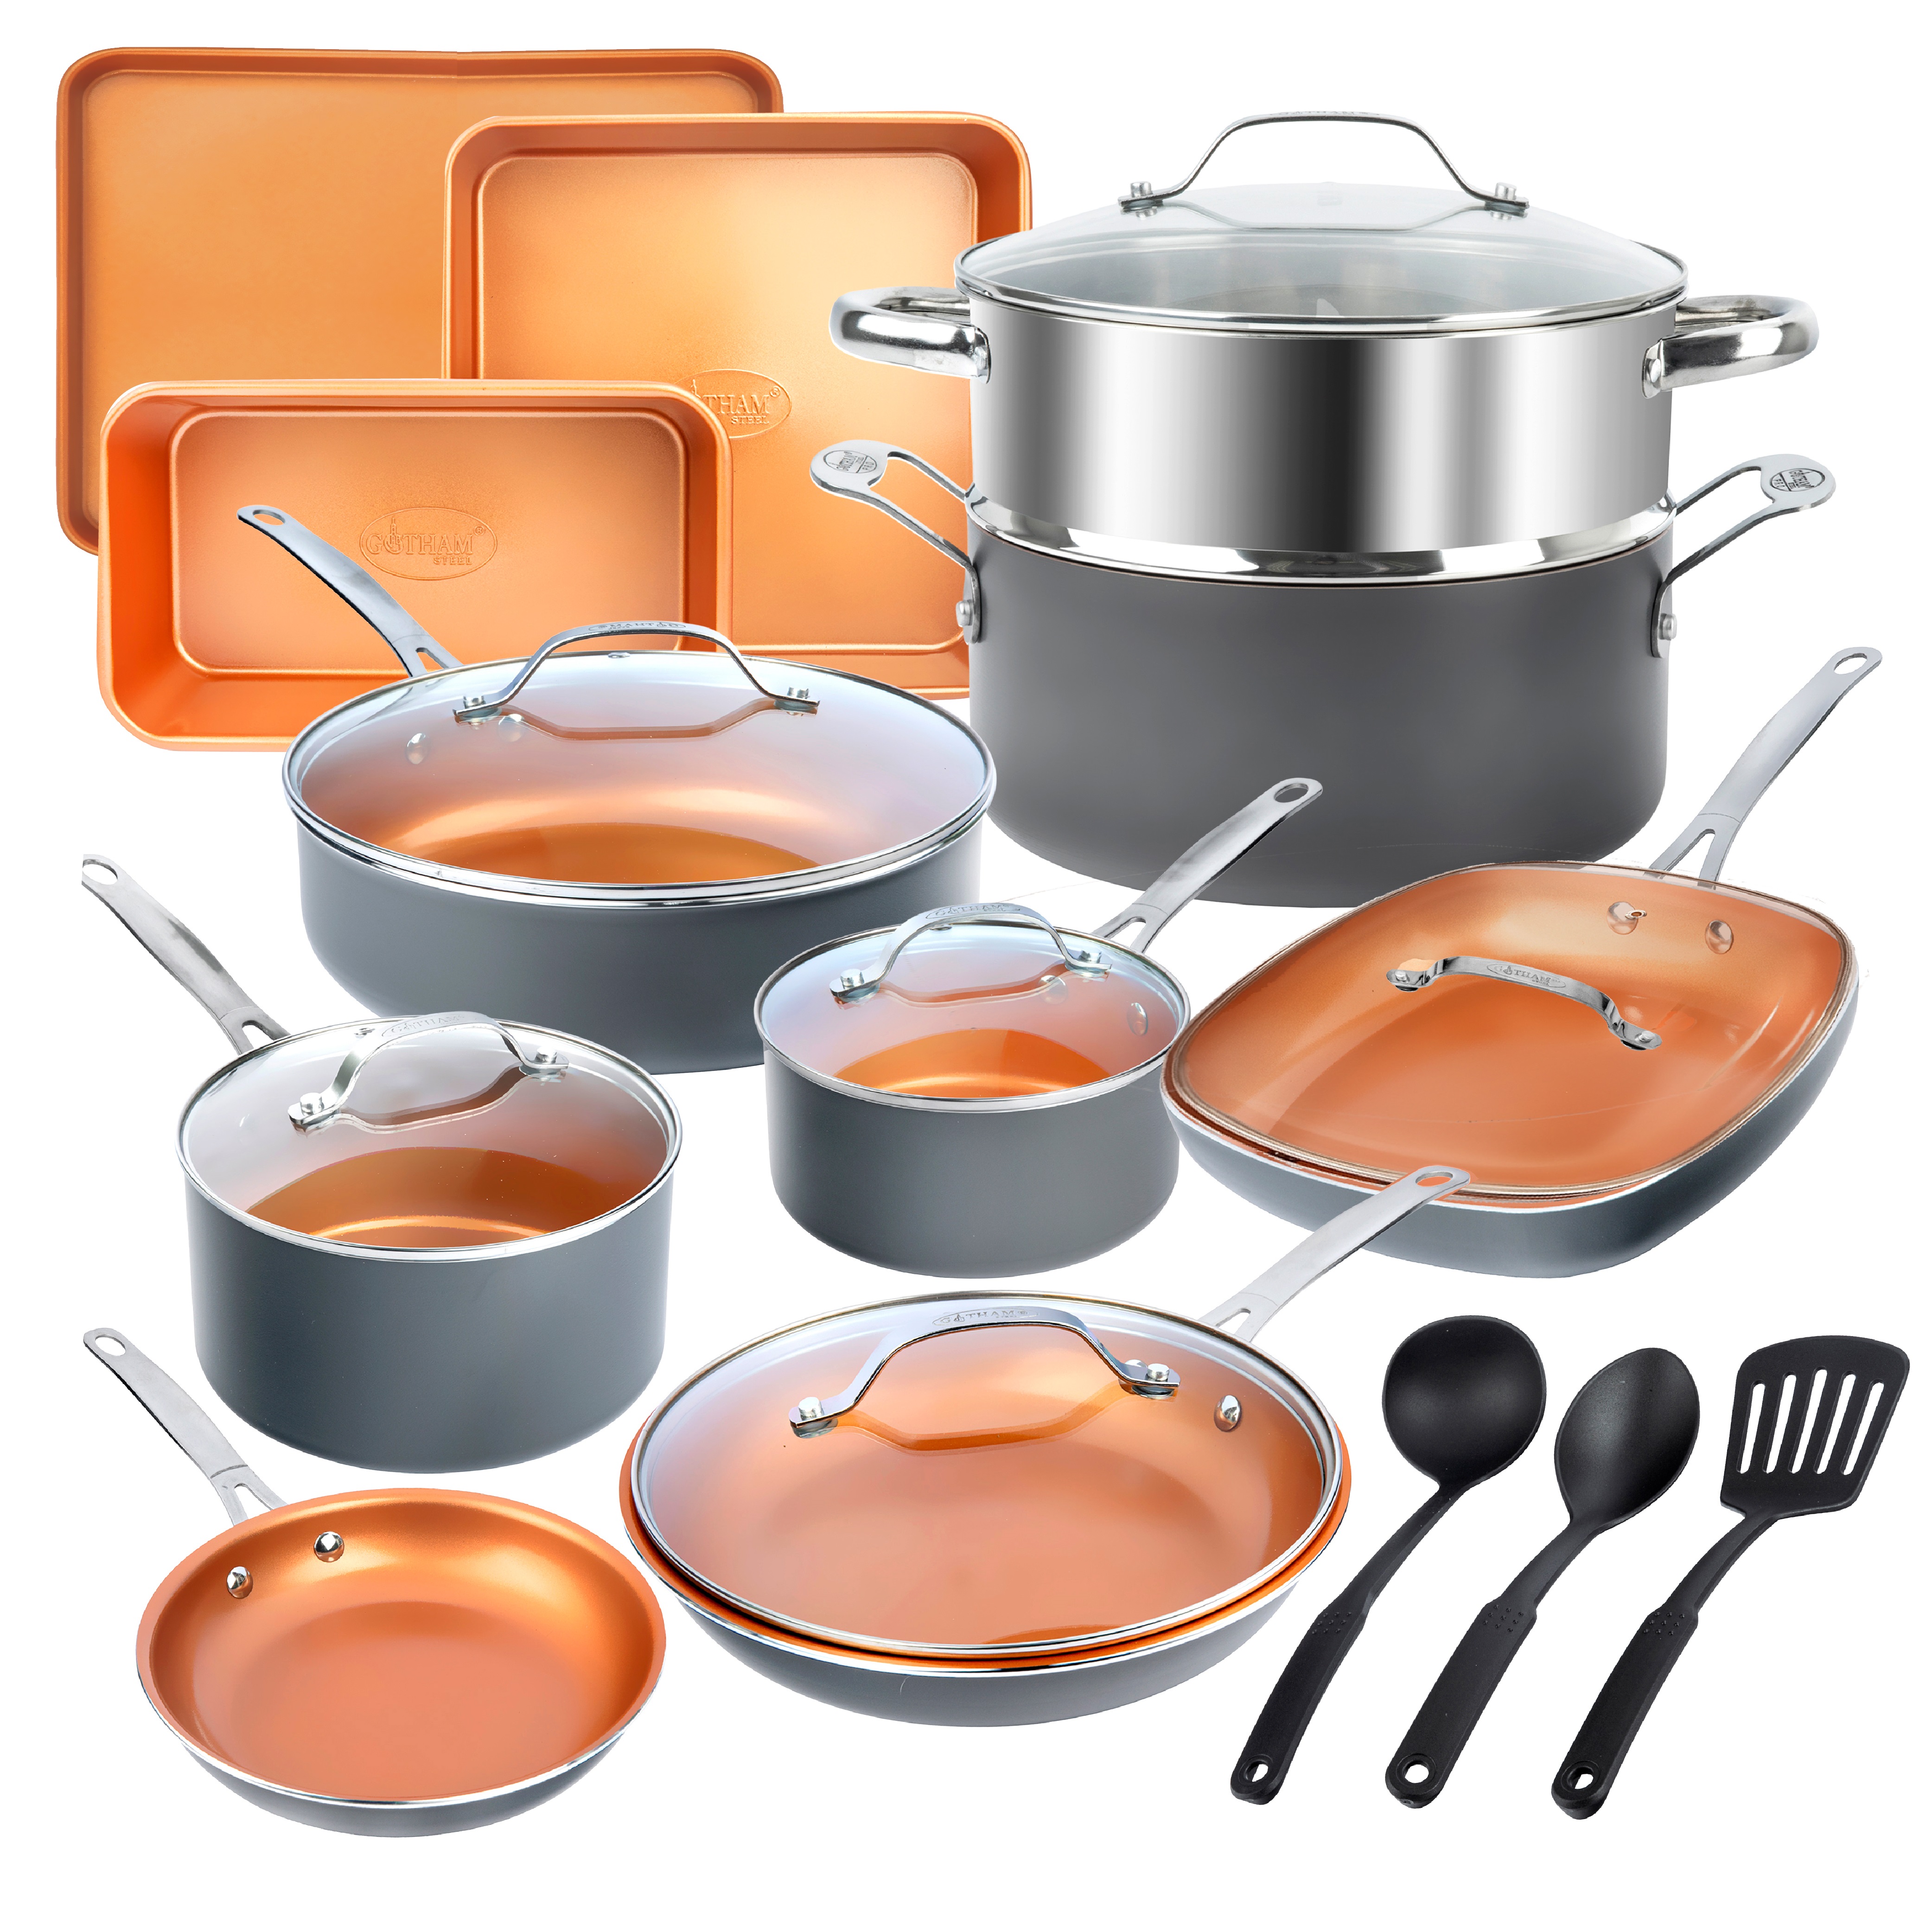 Gotham Steel Pots and Pans Set 20 Piece Cookware Set with Nonstick Ceramic Copper Coating - image 1 of 8